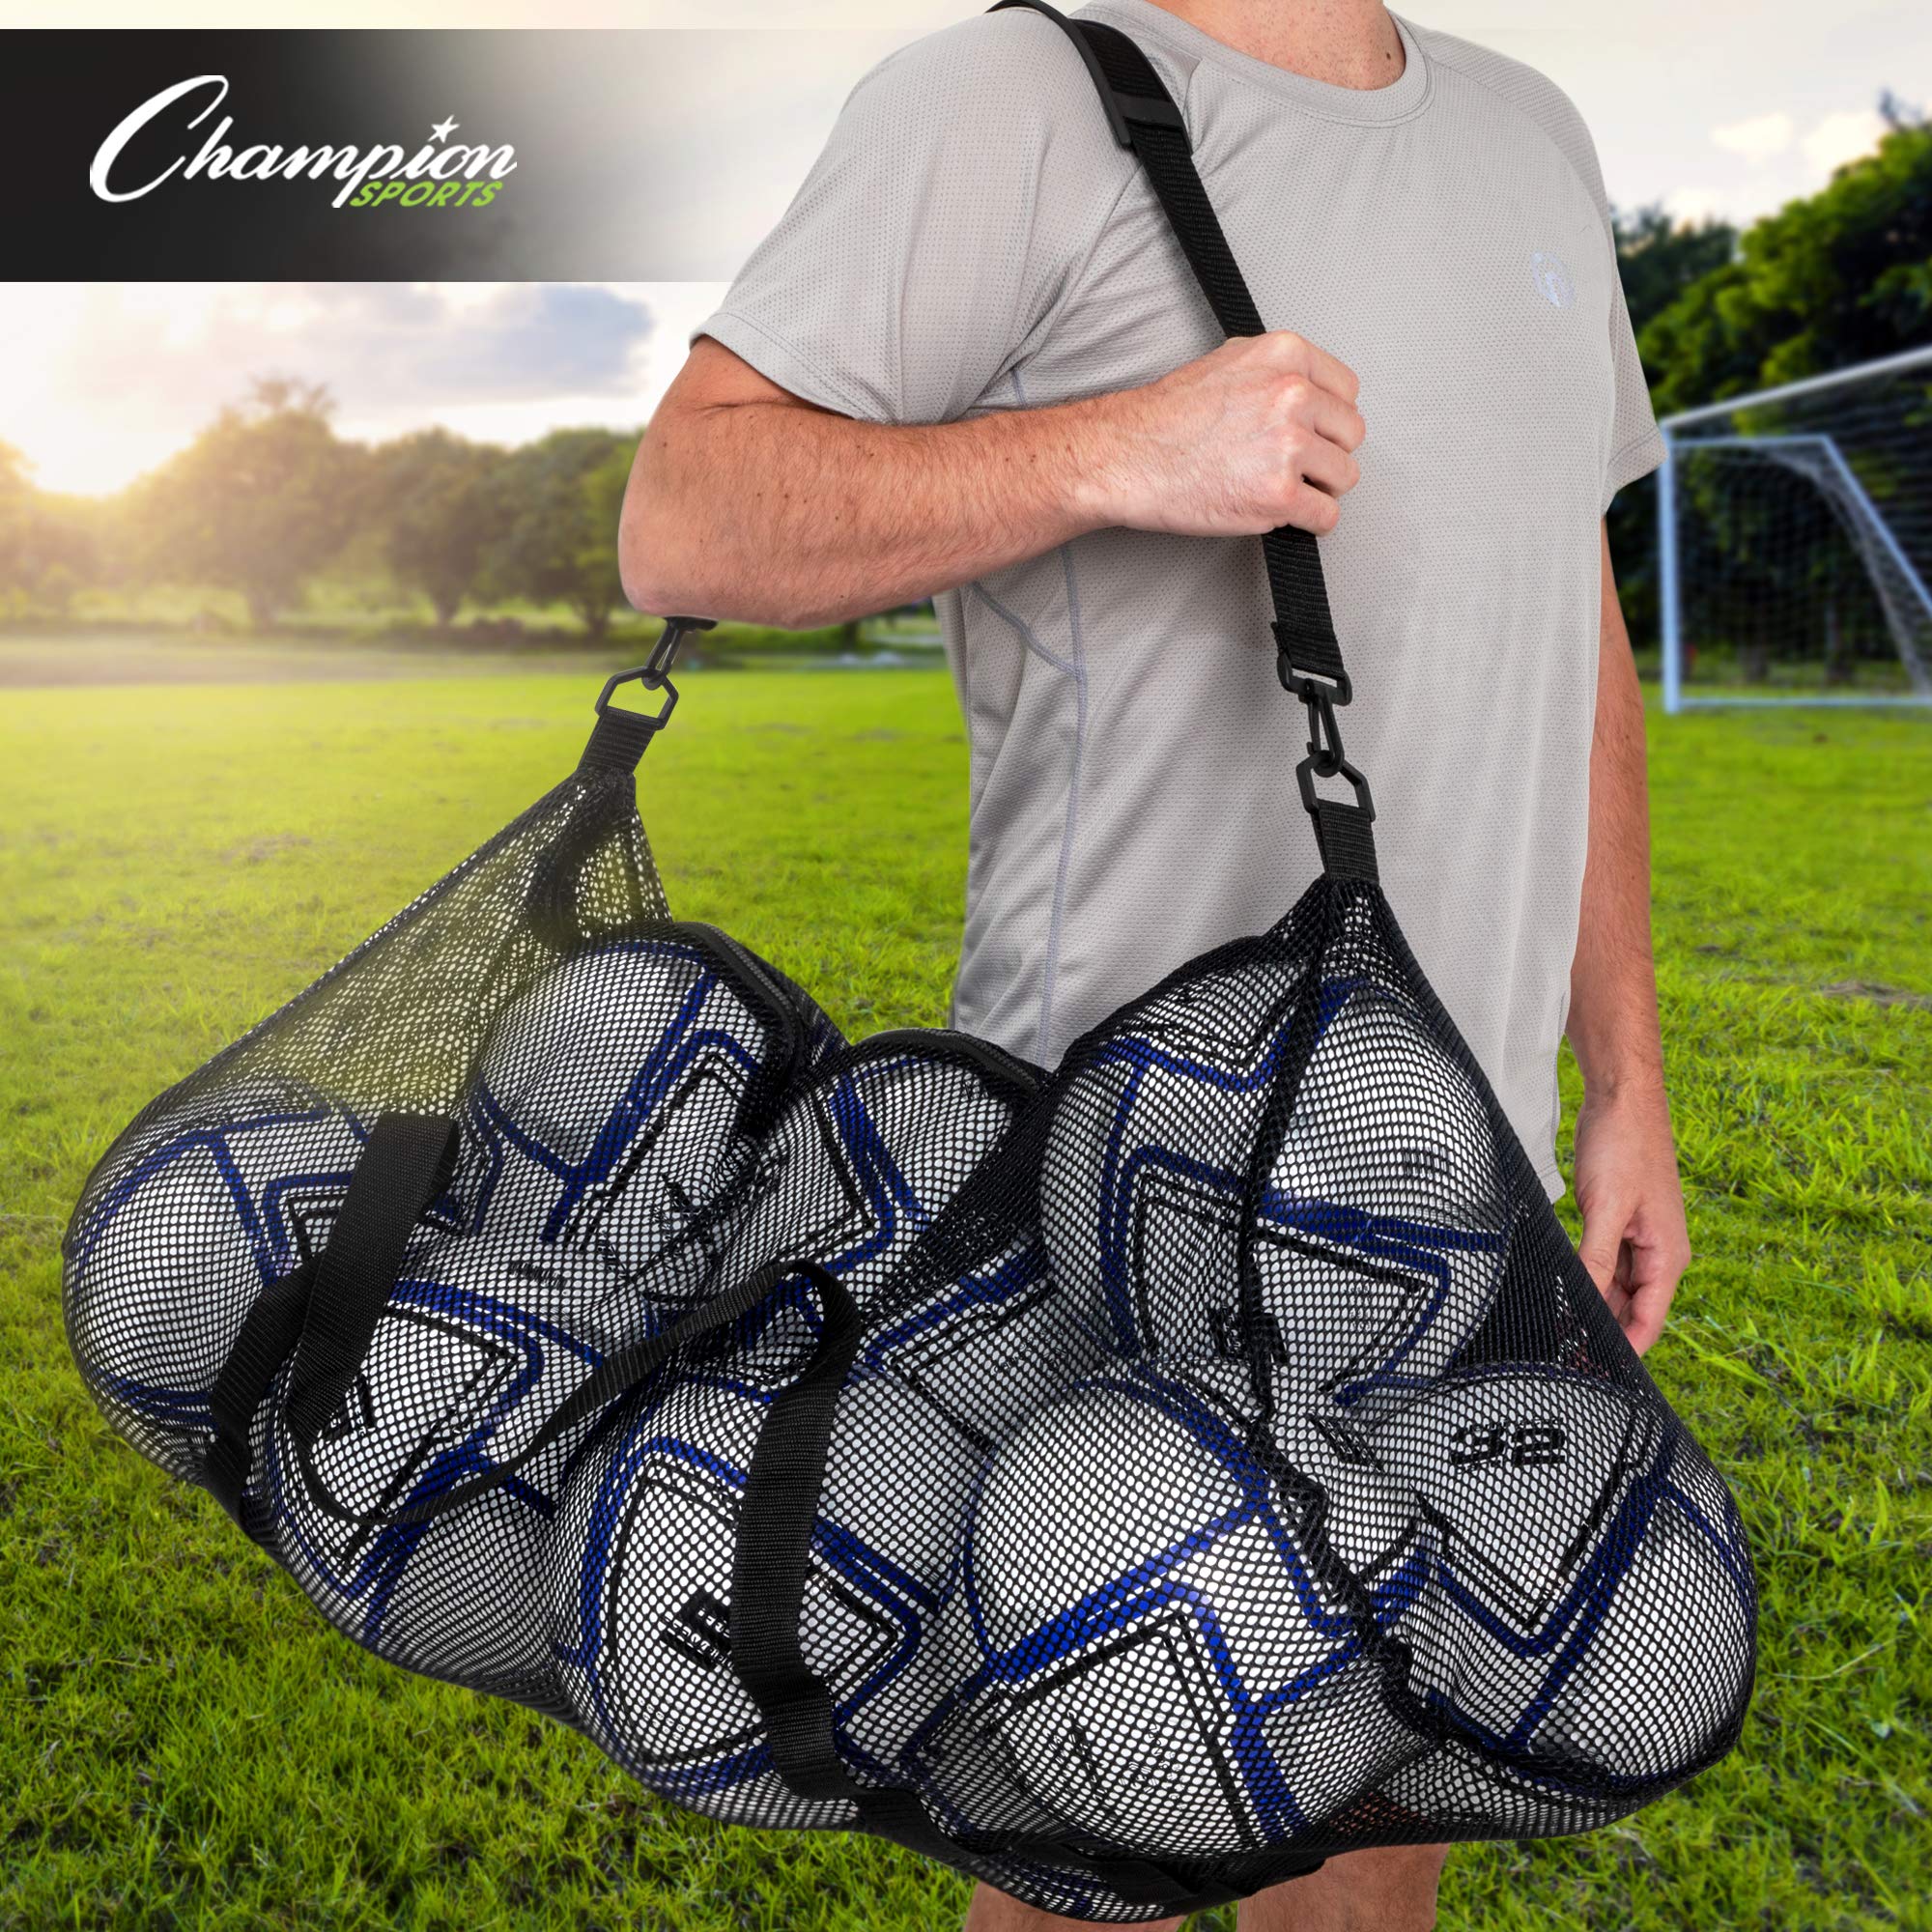 Champion Sports Mesh Duffle Bag with Zipper and Adjustable Shoulder Strap, 15” x 36” - Multipurpose, Oversized Gym Bag for Equipment, Sports Gear, Laundry - Breathable Mesh Scuba and Travel Bag